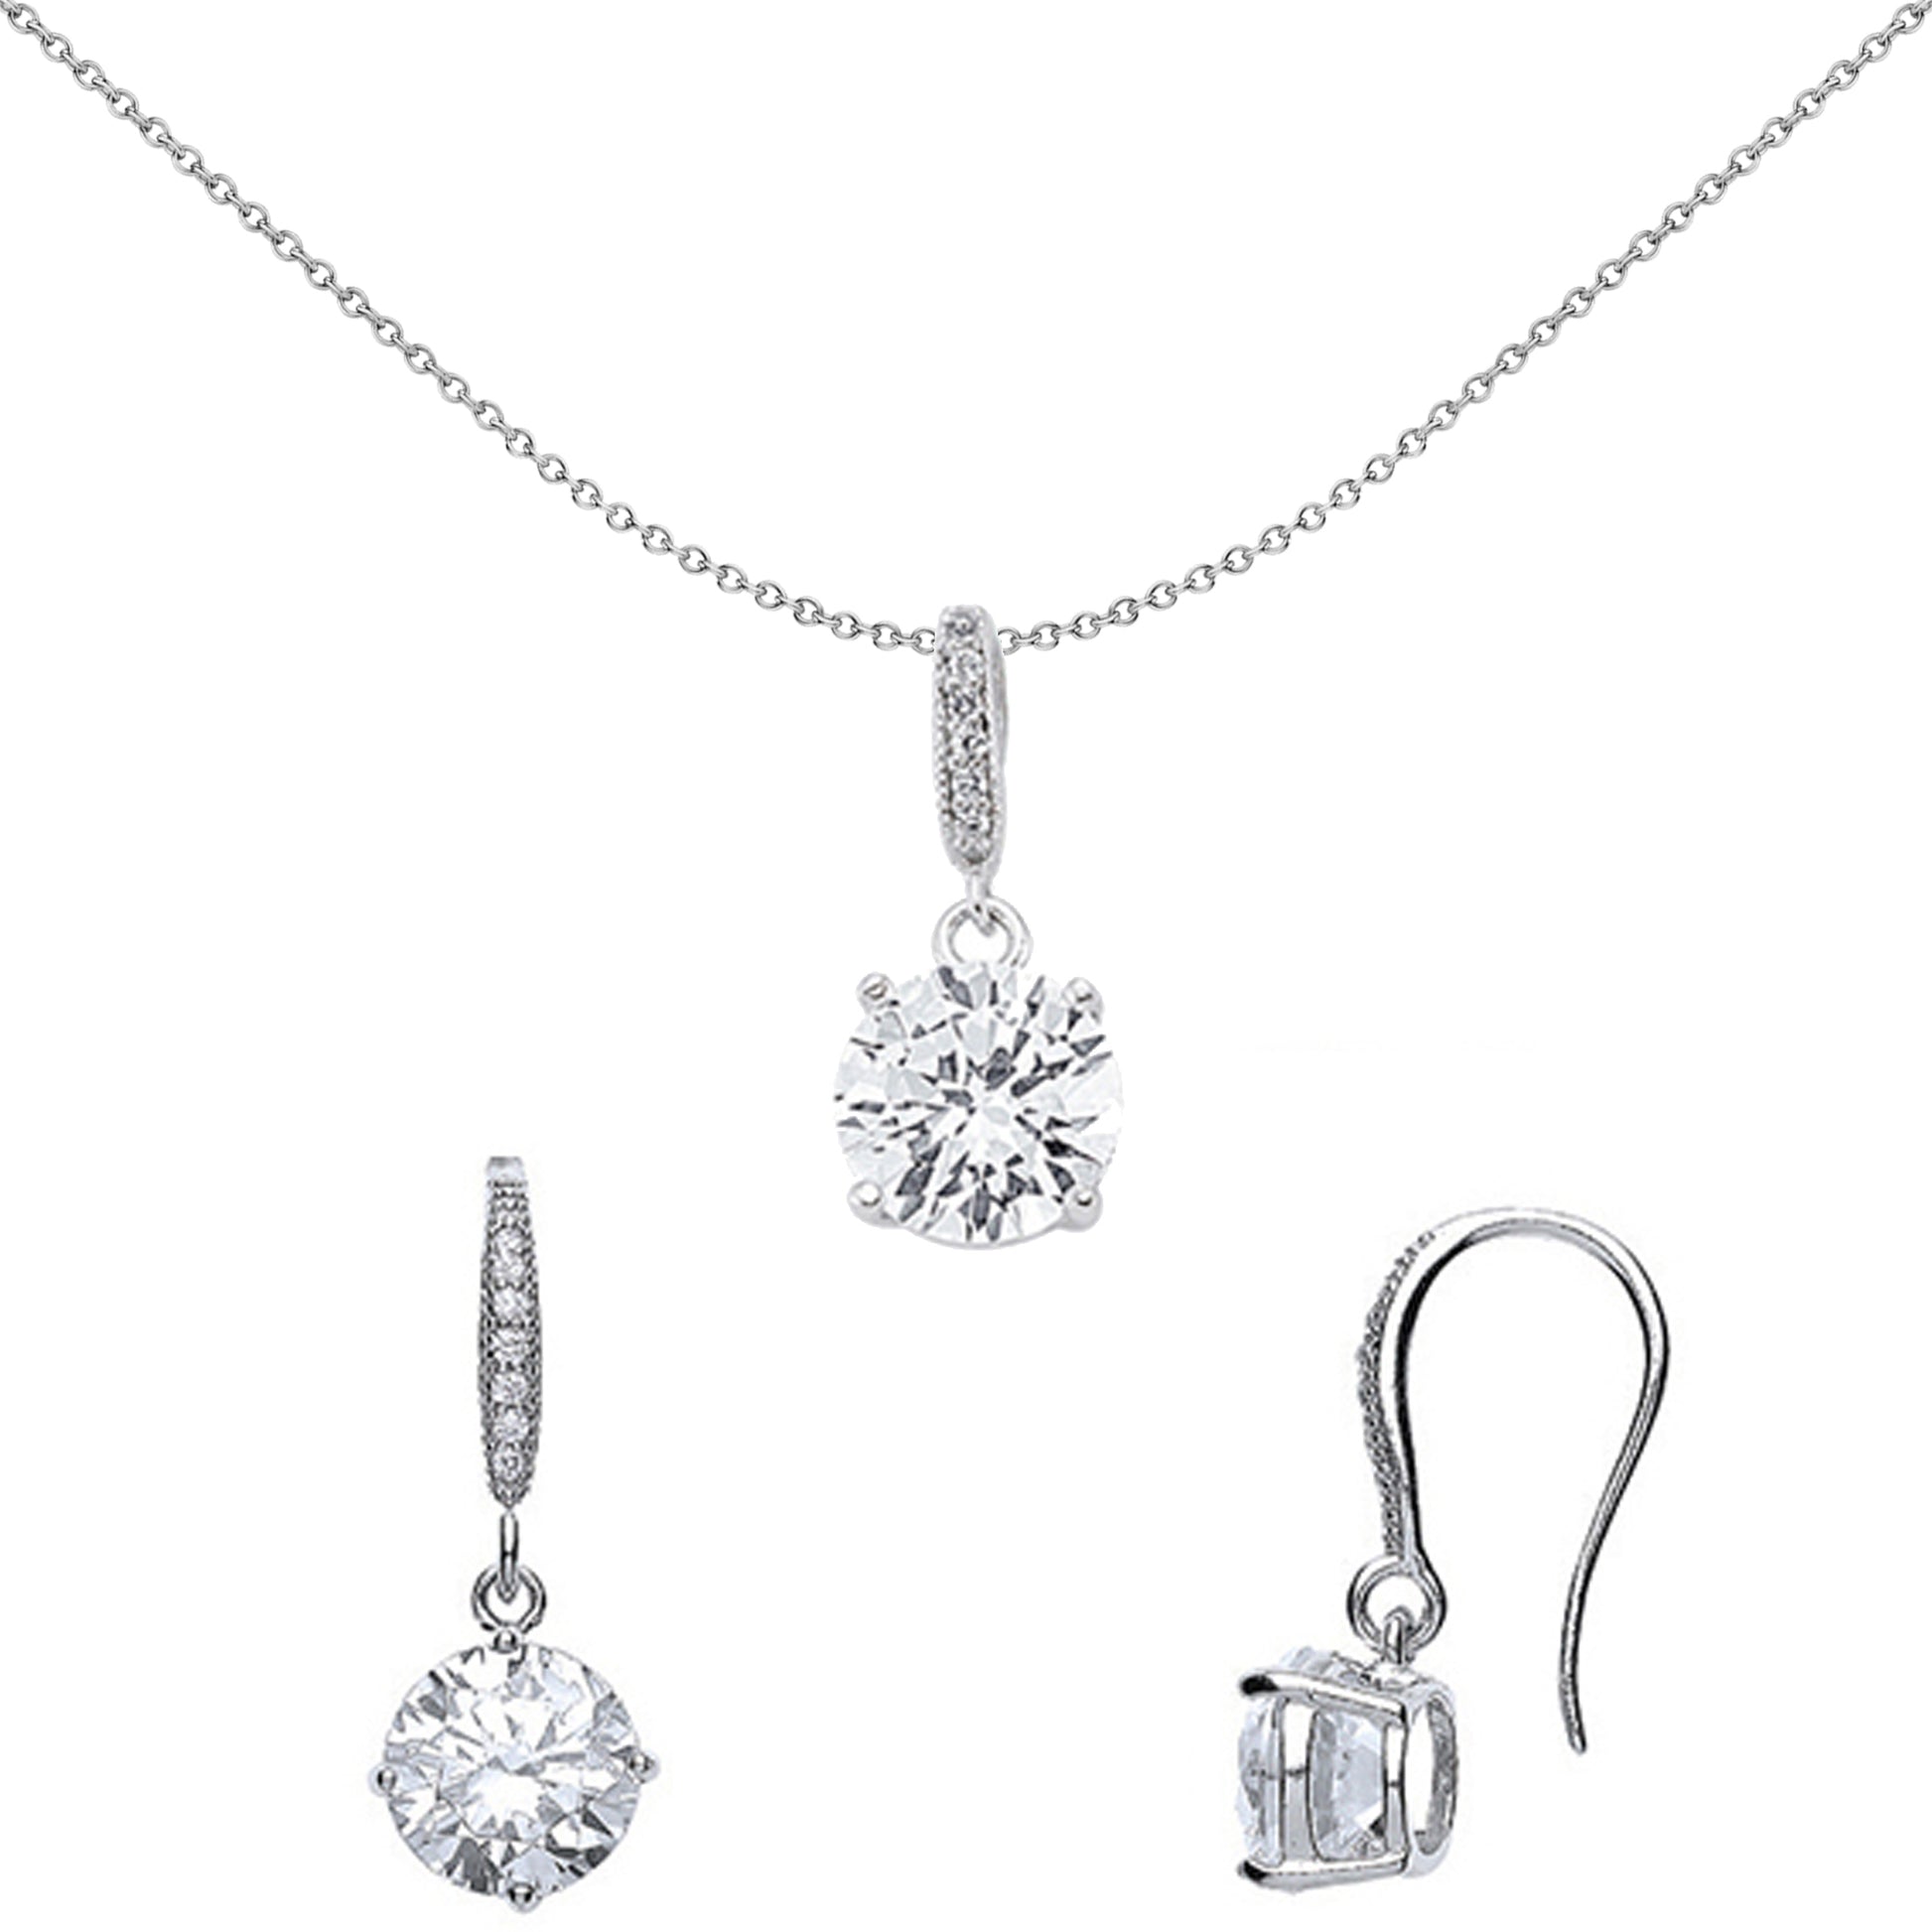 Silver  CZ Solitaire Hook Earrings Necklace Set - GSET602